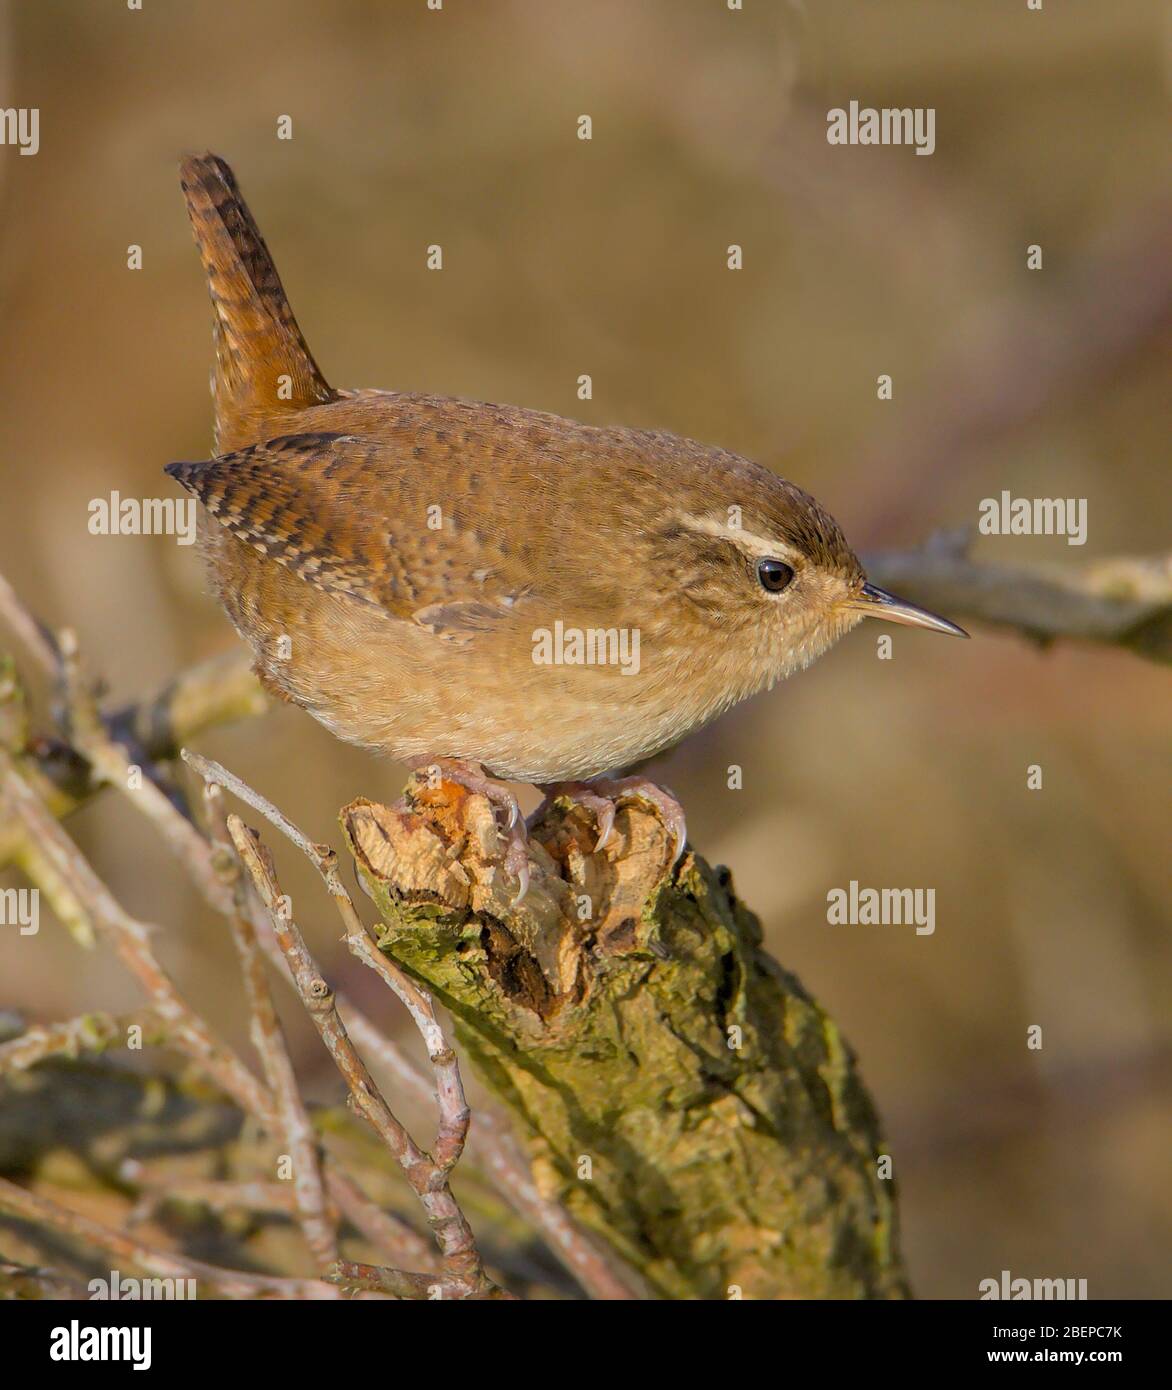 Side view of a Wren, Troglodytes trglodytes, perched on a twig with tail raised protecting its territory. Taken at Stanpit Marsh UK Stock Photo